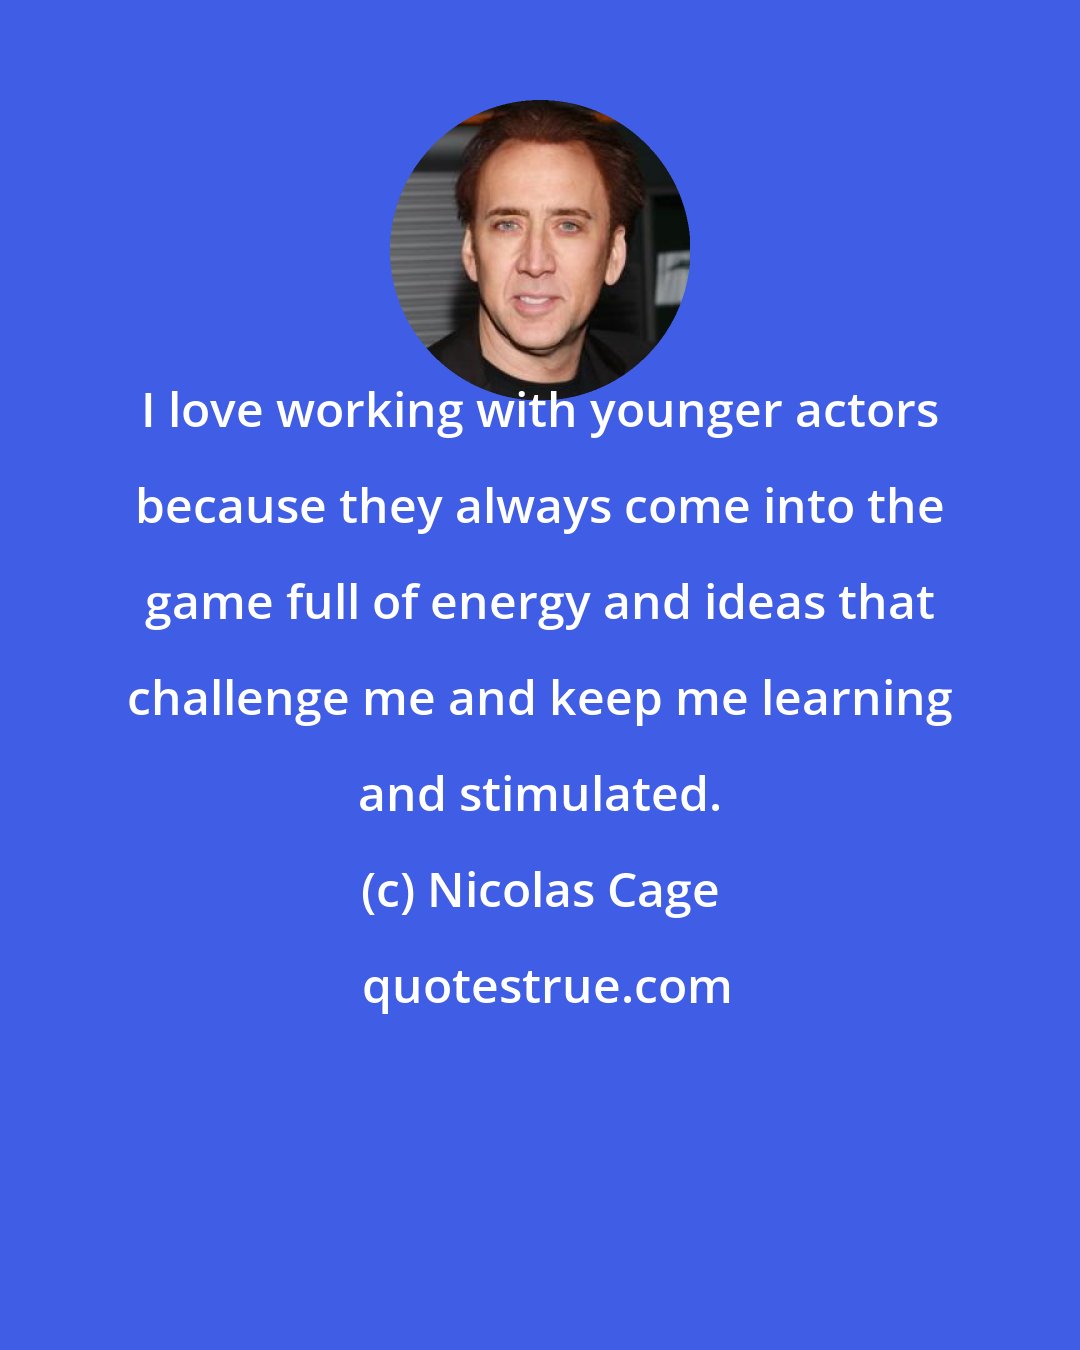 Nicolas Cage: I love working with younger actors because they always come into the game full of energy and ideas that challenge me and keep me learning and stimulated.